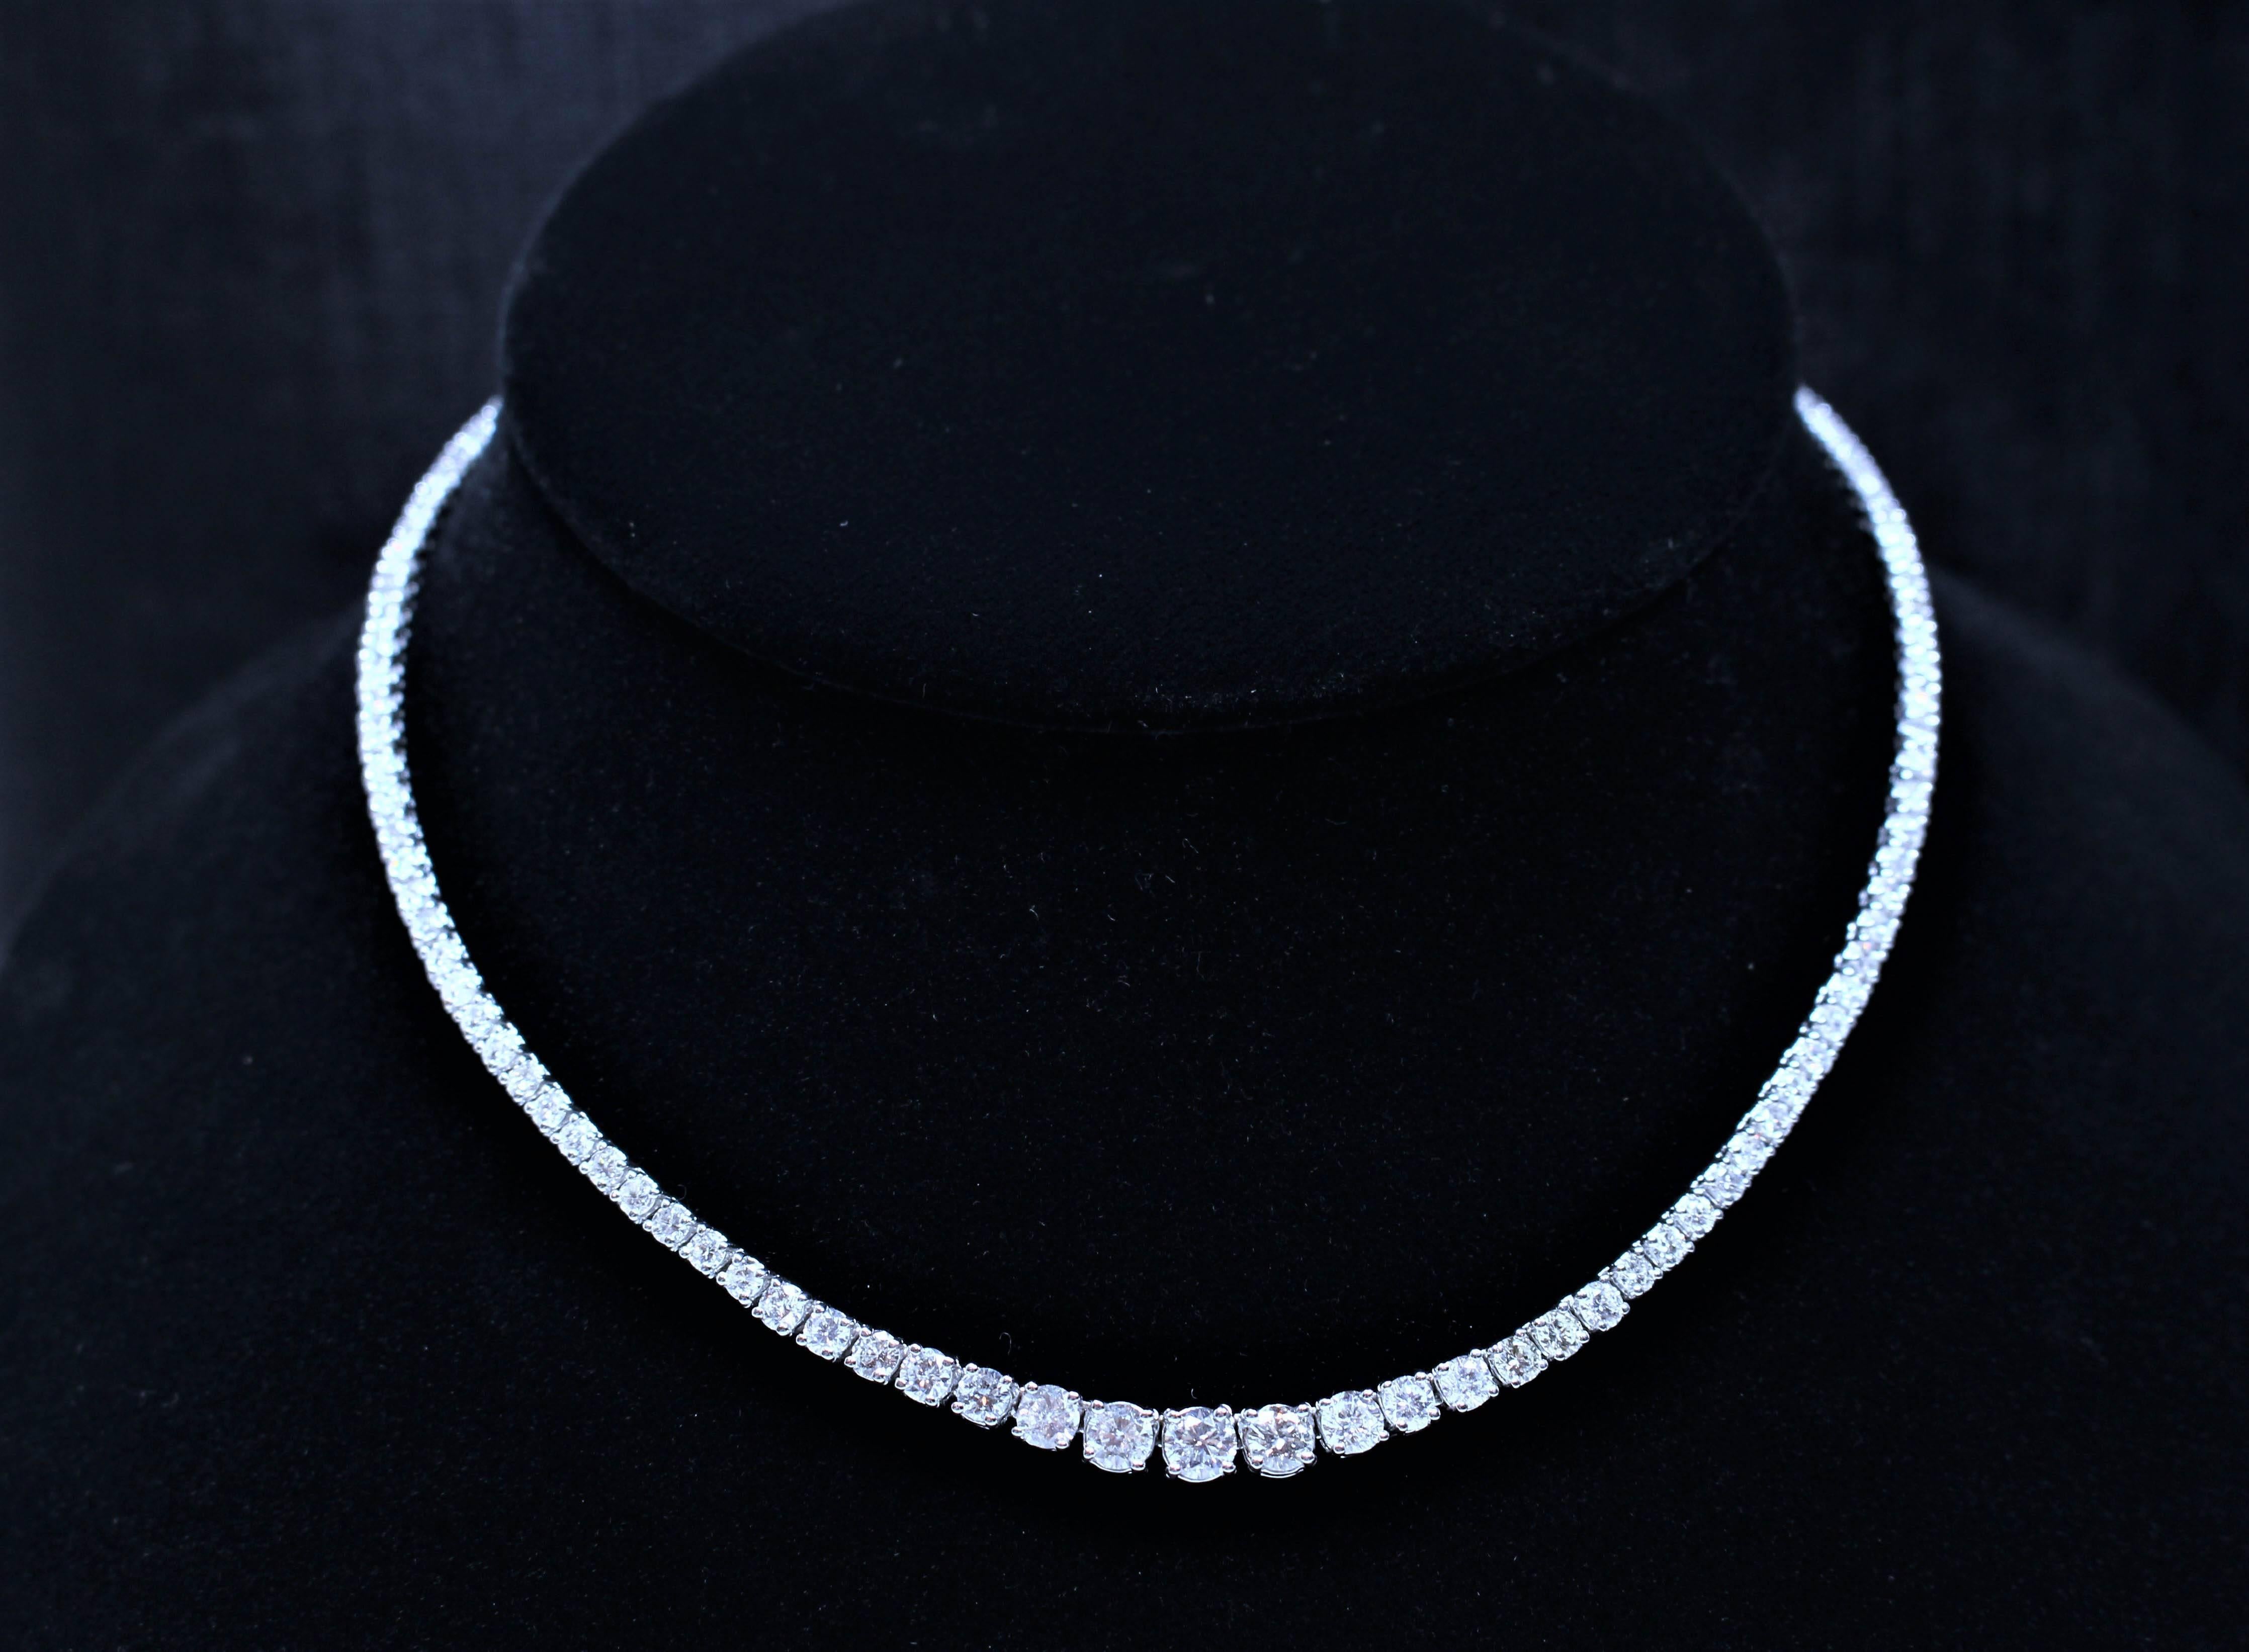 This necklace is composed of 18KT white gold with stunning round cut diamonds. Features a Riviere design with graduated diamonds. A beautiful classic style. In excellent condition.

Please feel free to ask any questions you may have, we are happy to